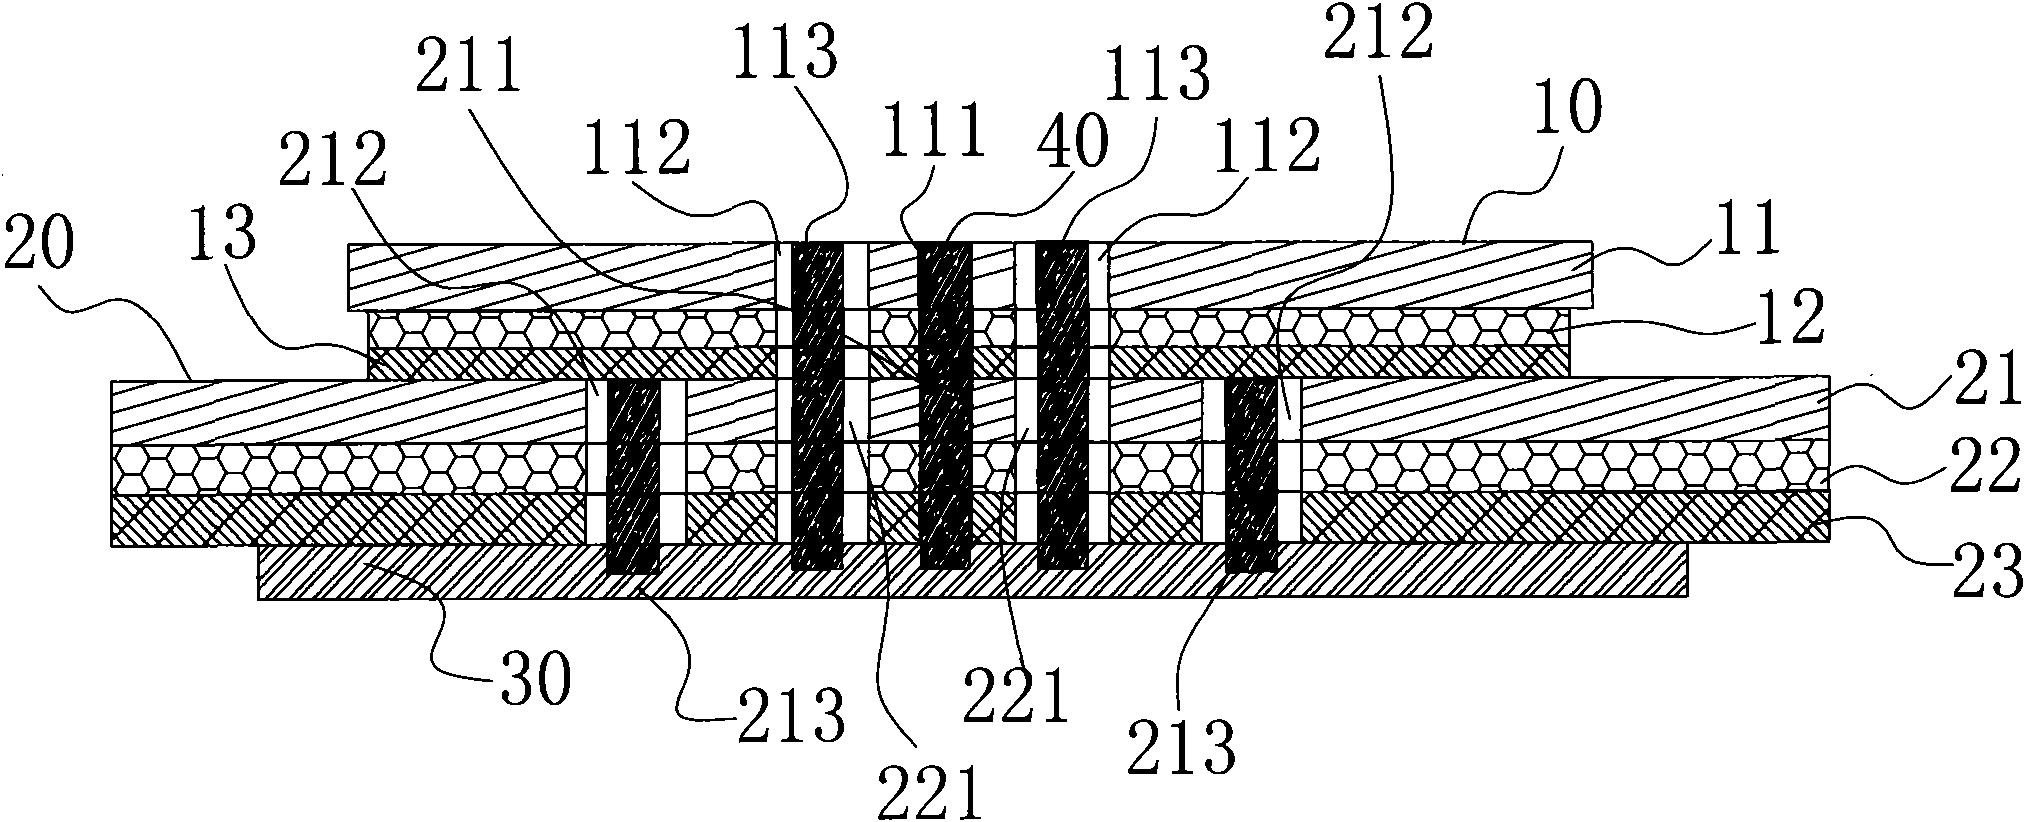 Double-frequency microstrip antenna